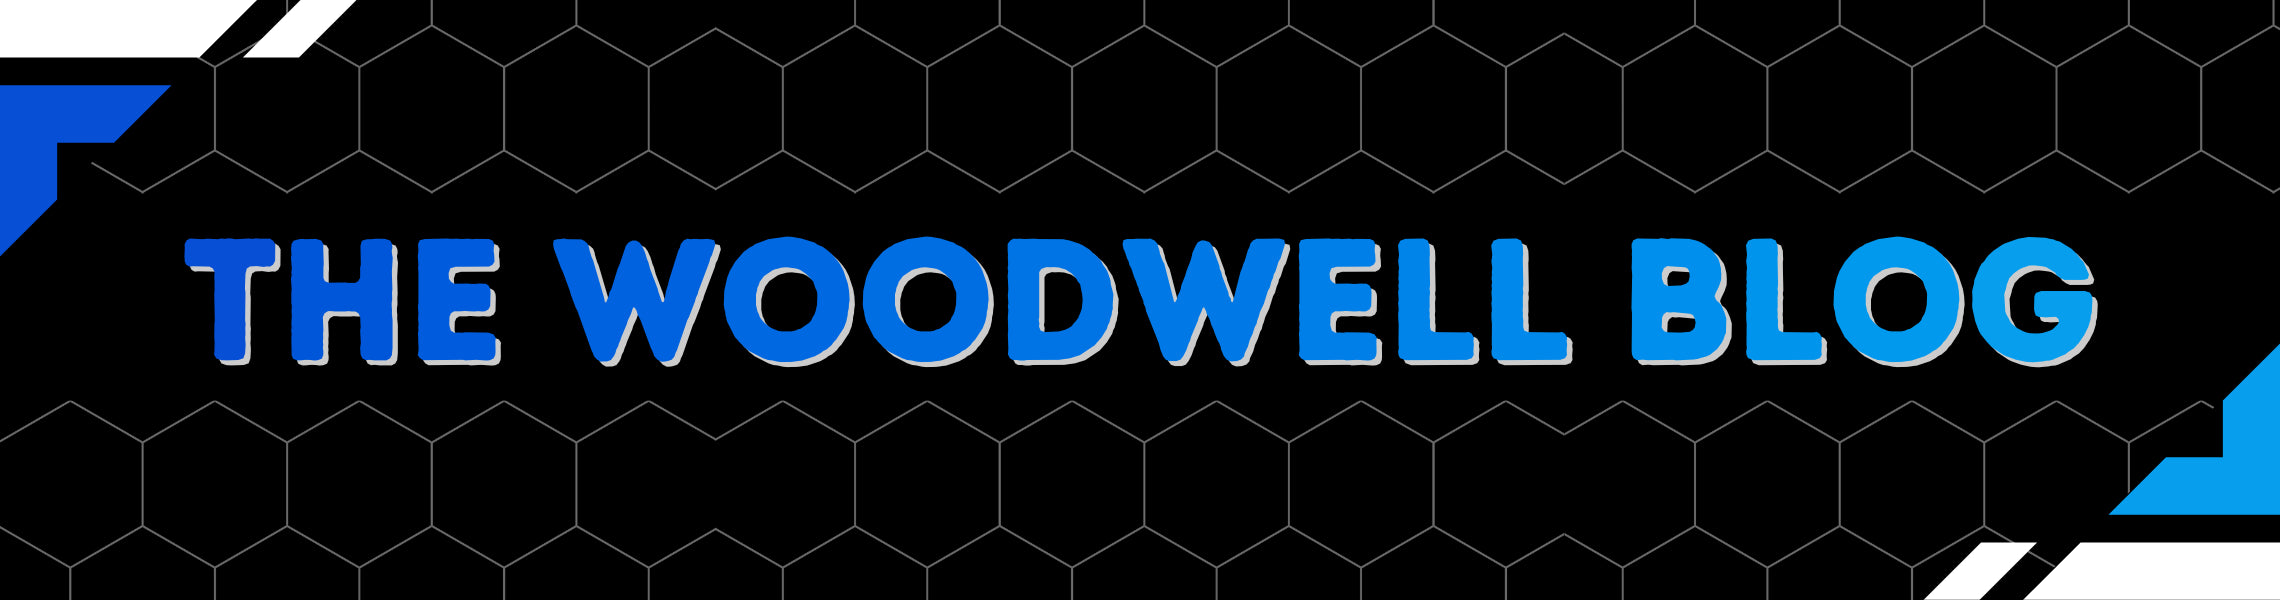 The Woodwell Blog